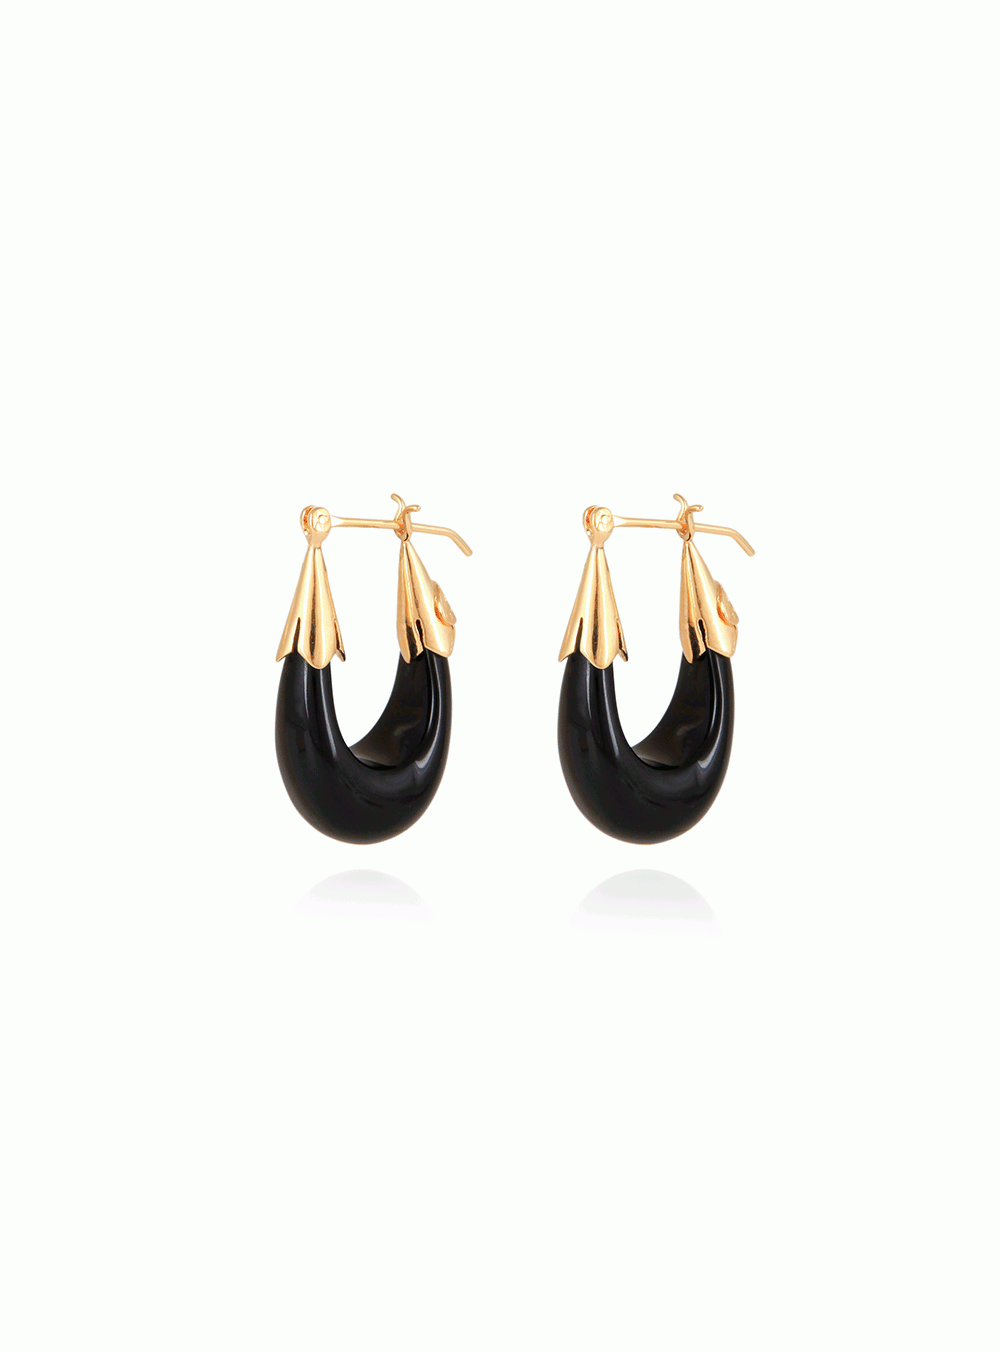 ECUME EARRINGS GOLD SMALL SIZE